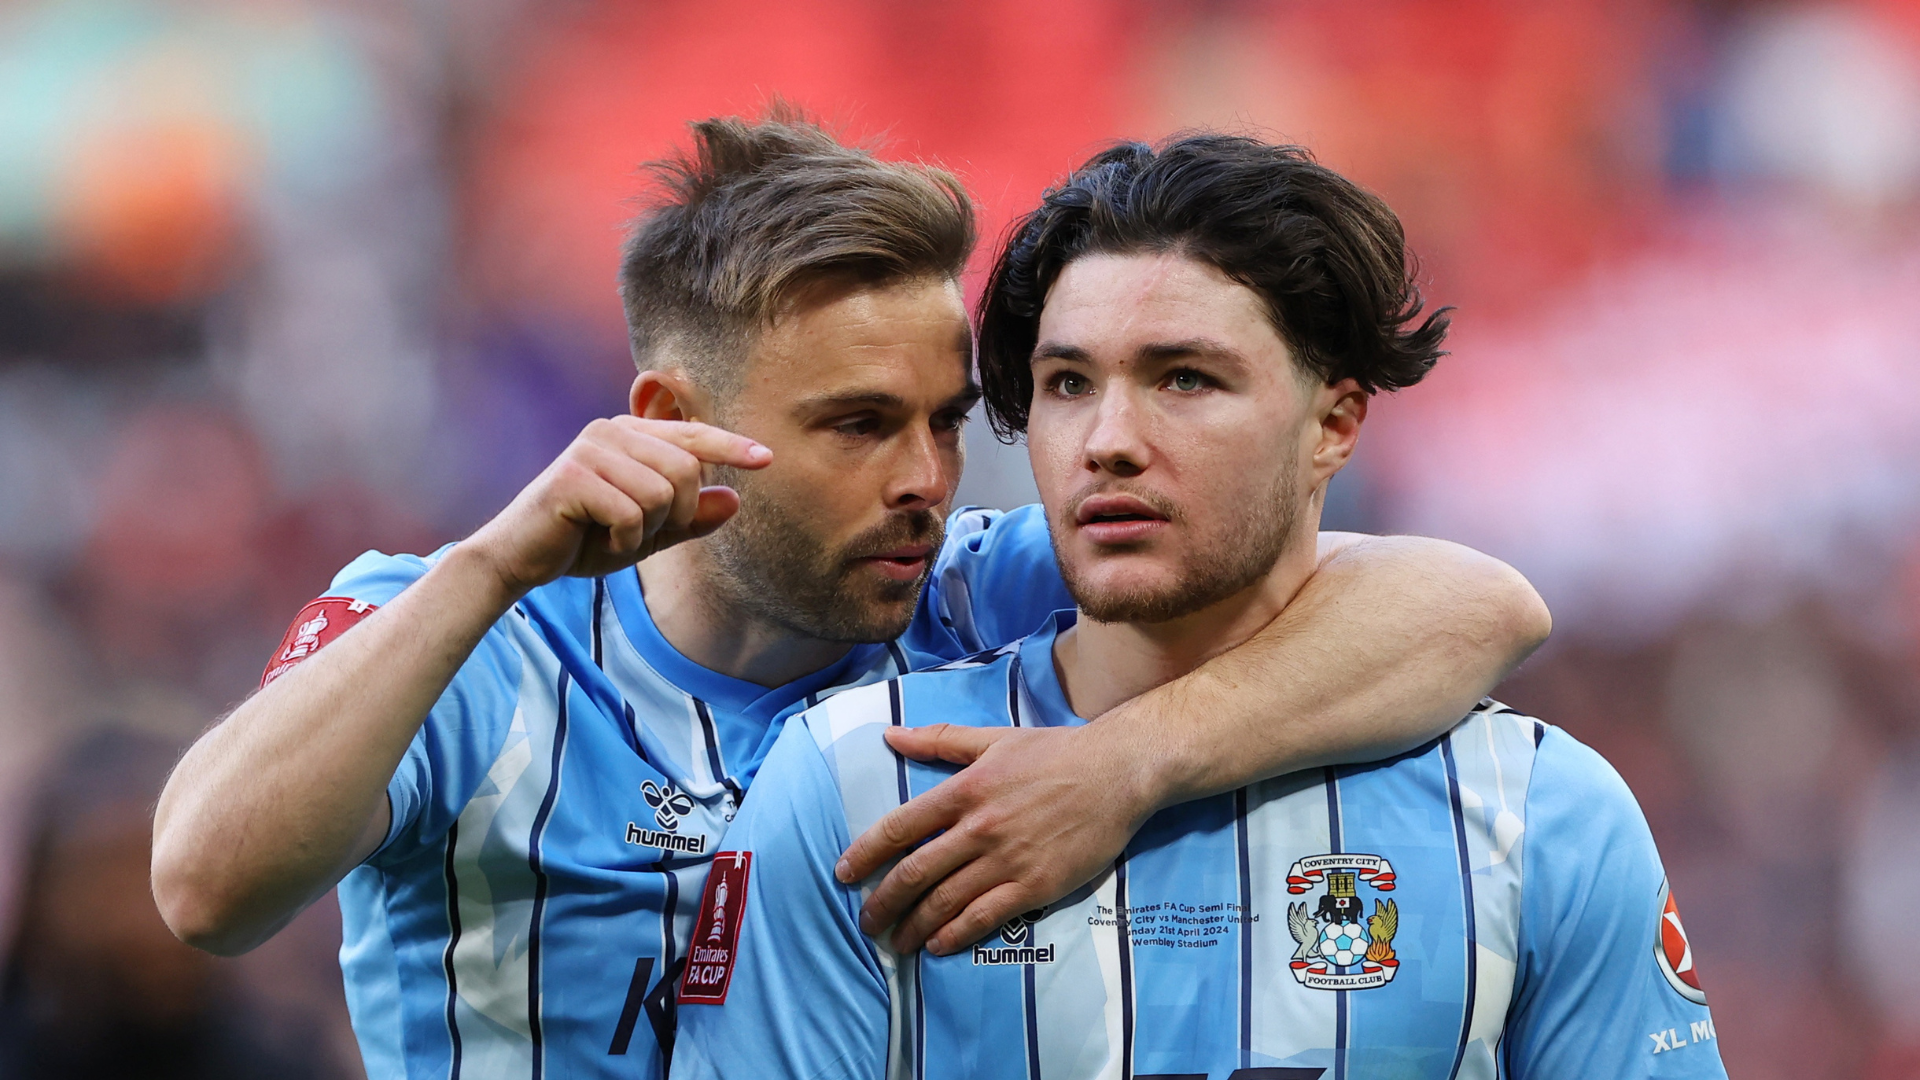 A pointless signing" - West Ham eyeing move for Coventry City's Callum O'Hare